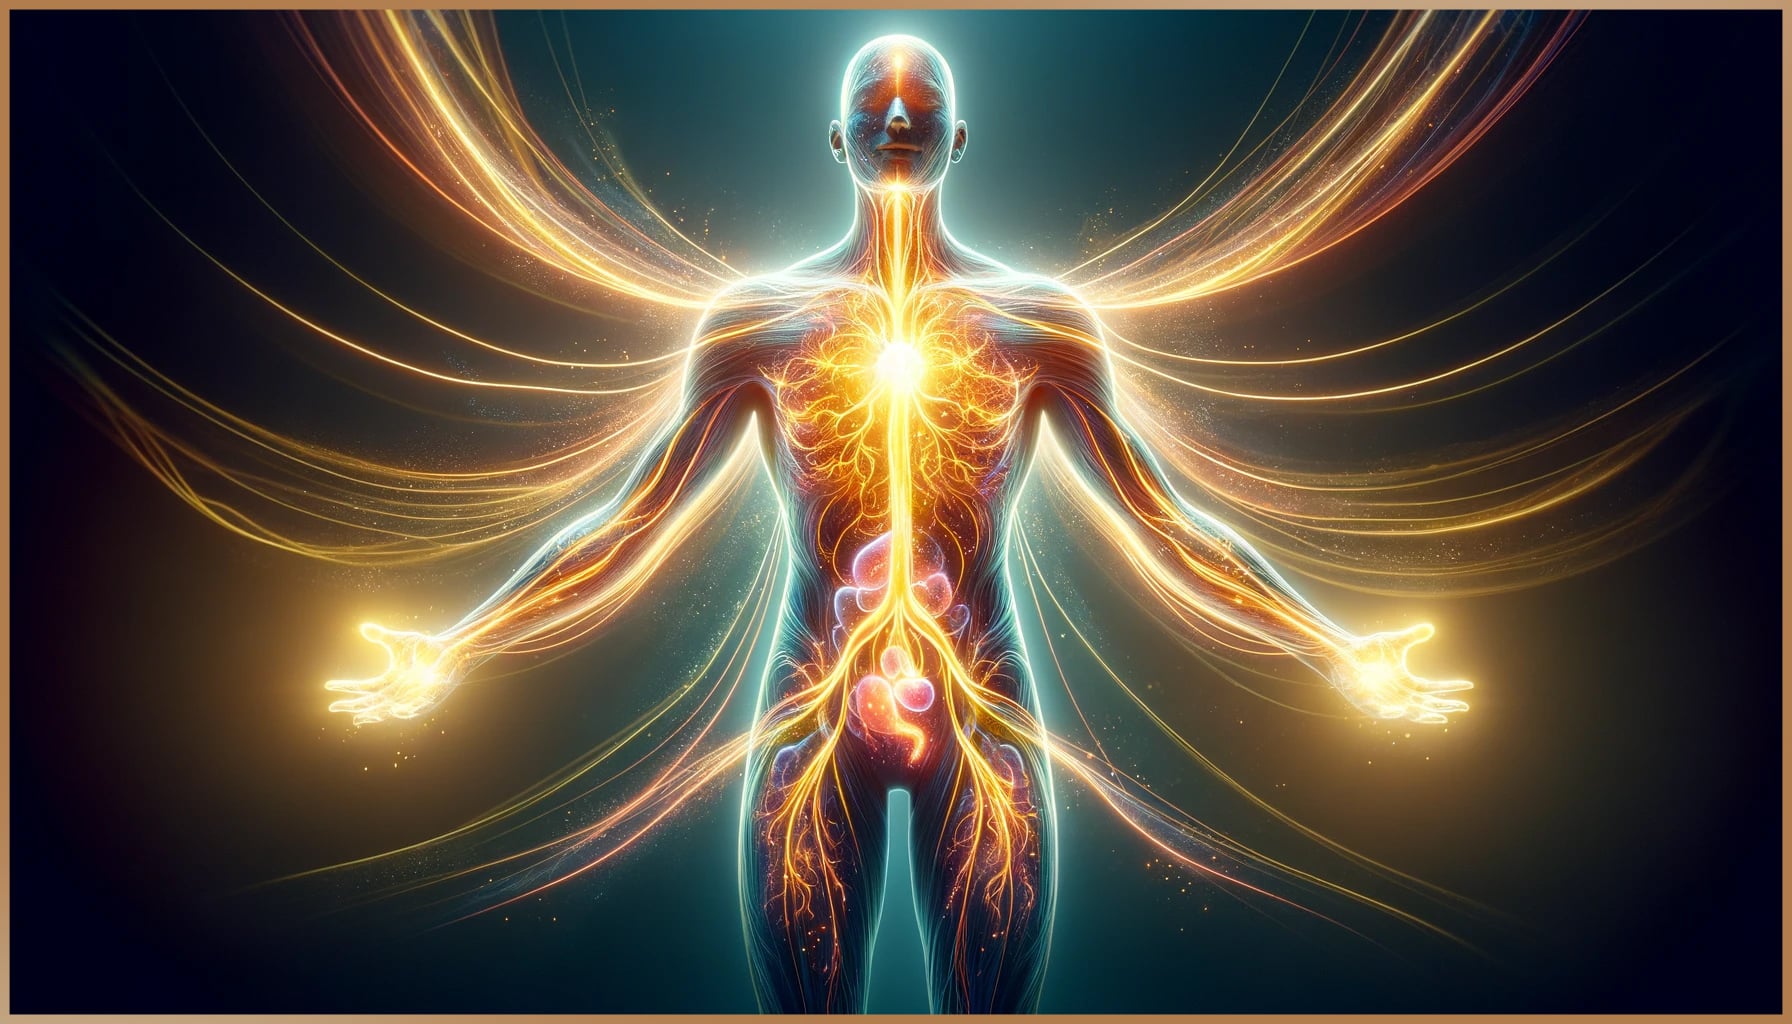 An illustration of a human figure aglow with vibrant, golden-hued energy lines flowing through the body, symbolizing the practice of energy healing and the interconnectedness of body and mind.